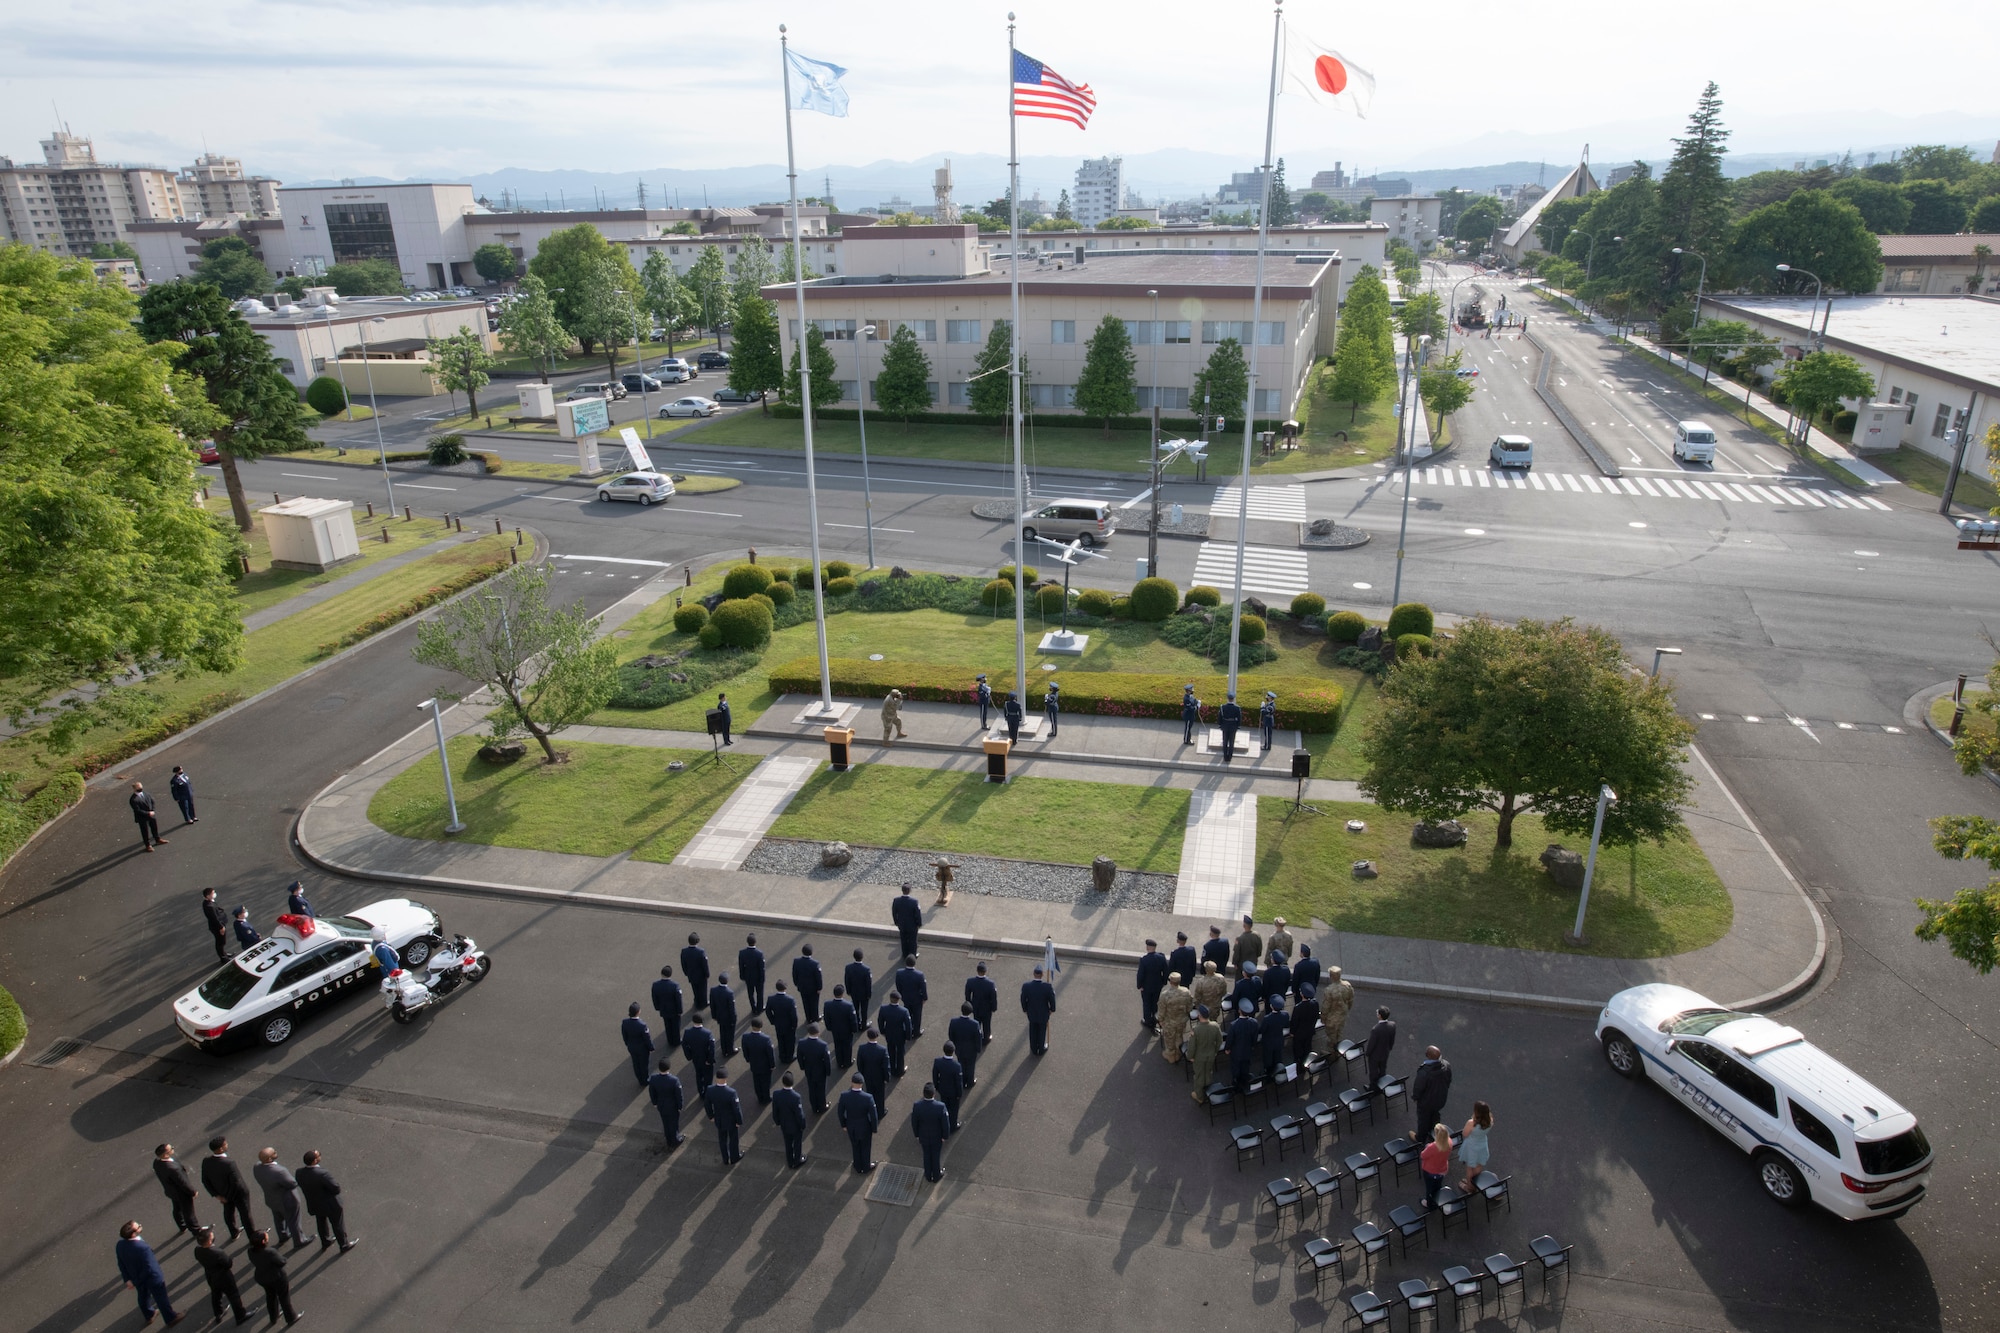 The base honor guard prepares to lower the American and Japanese flags during the National Police Week retreat ceremony at Yokota Air Base, Japan, May 14, 2021. Police Week is a week-long event to honor police officers and is recognized overseas with security forces members. (U.S. Air Force photo by Staff Sgt. Ryann Holzapfel)